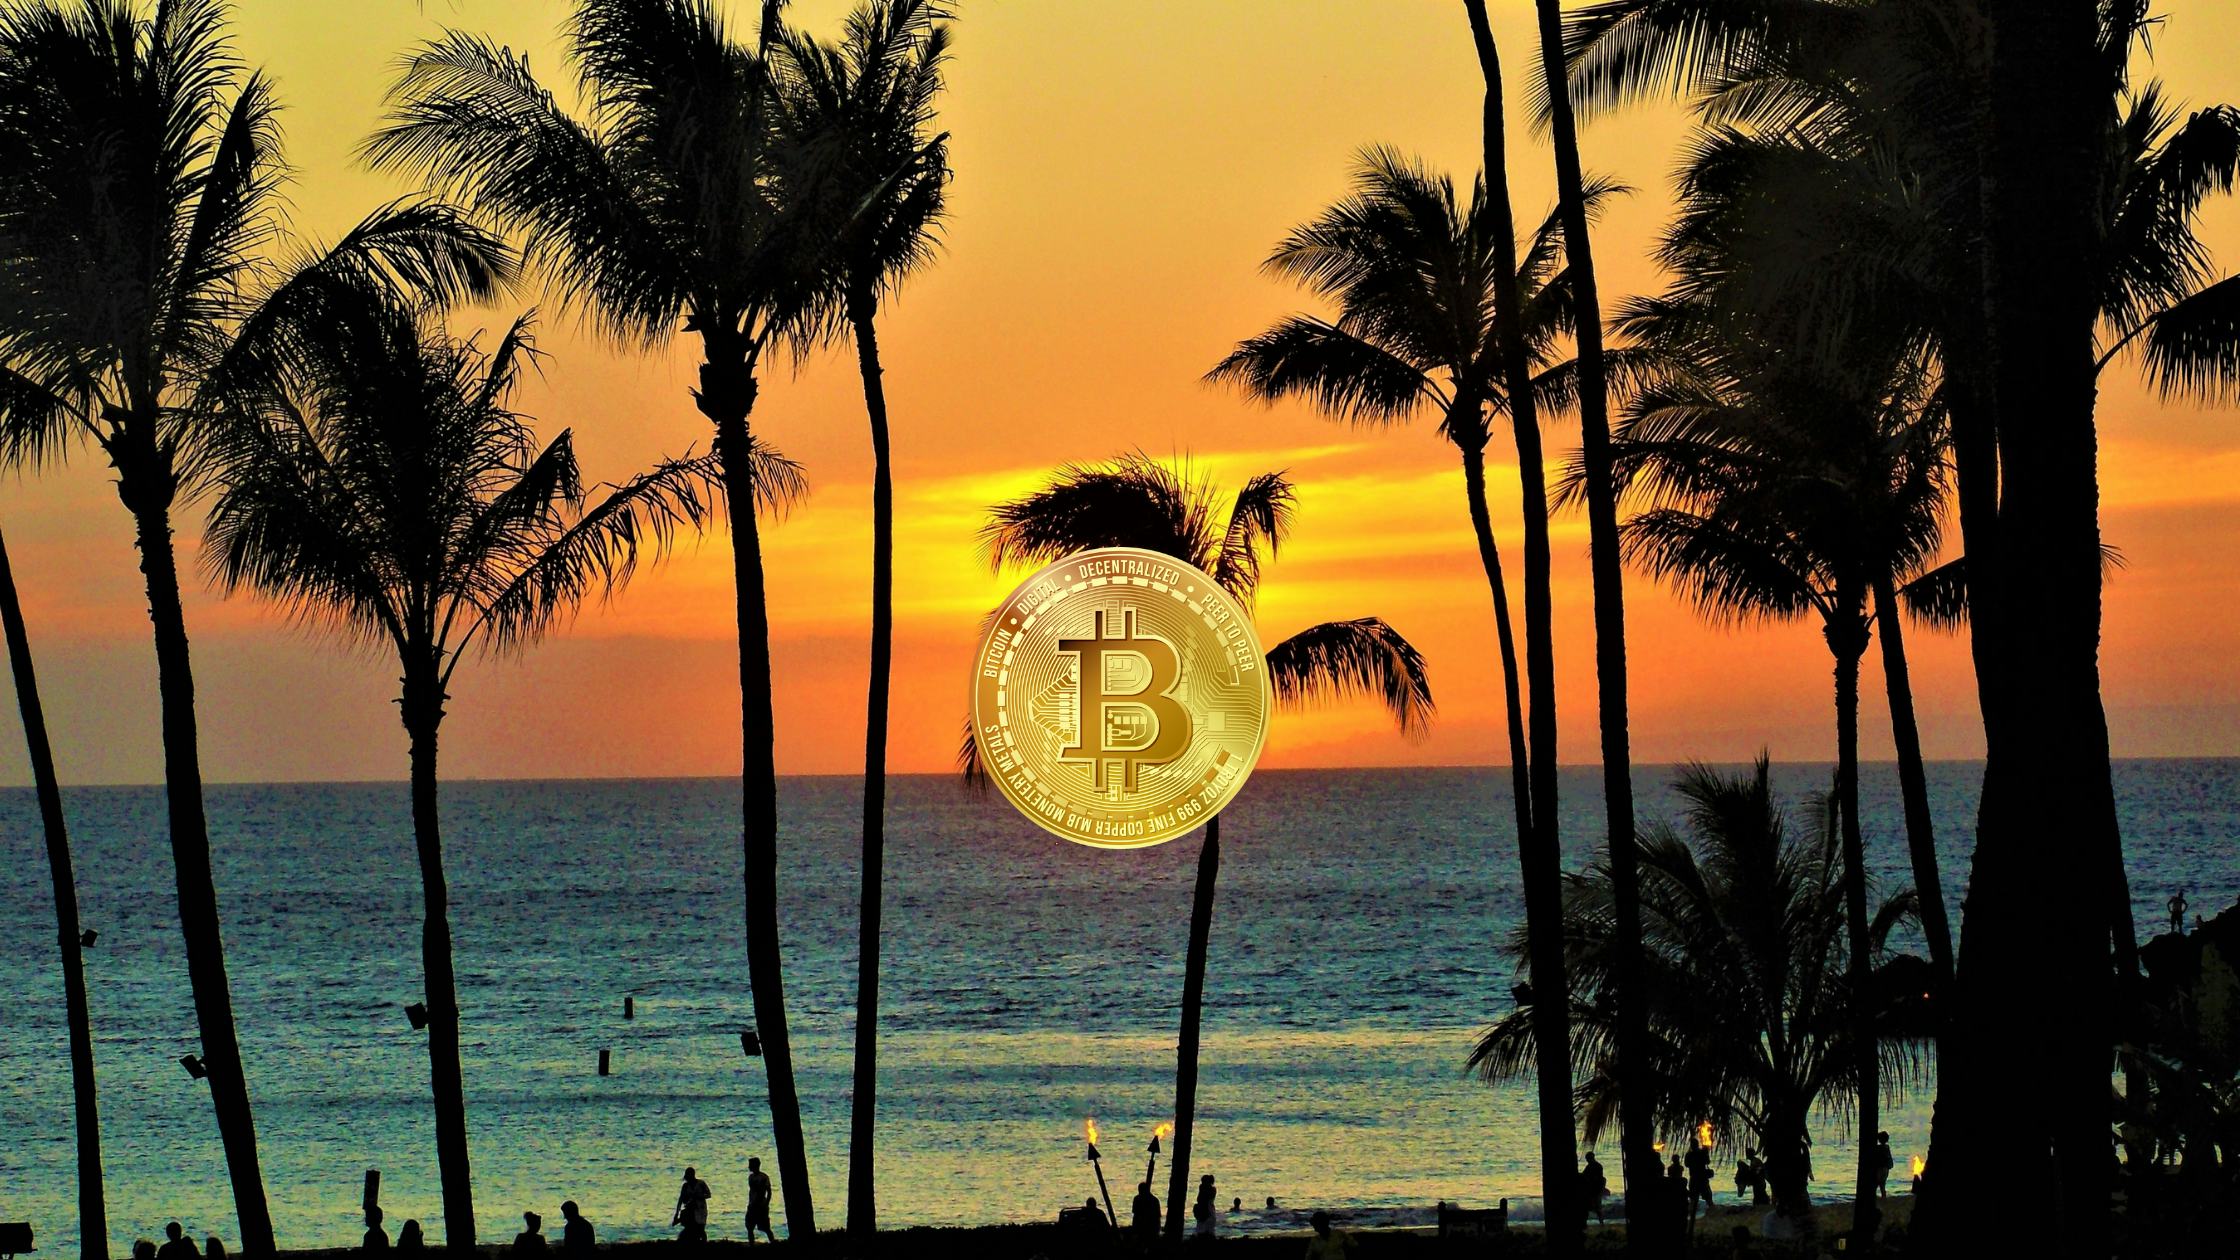 Hawaii Becomes Latest State to Approve Task Force to Examine Bitcoin, Web3 Technology